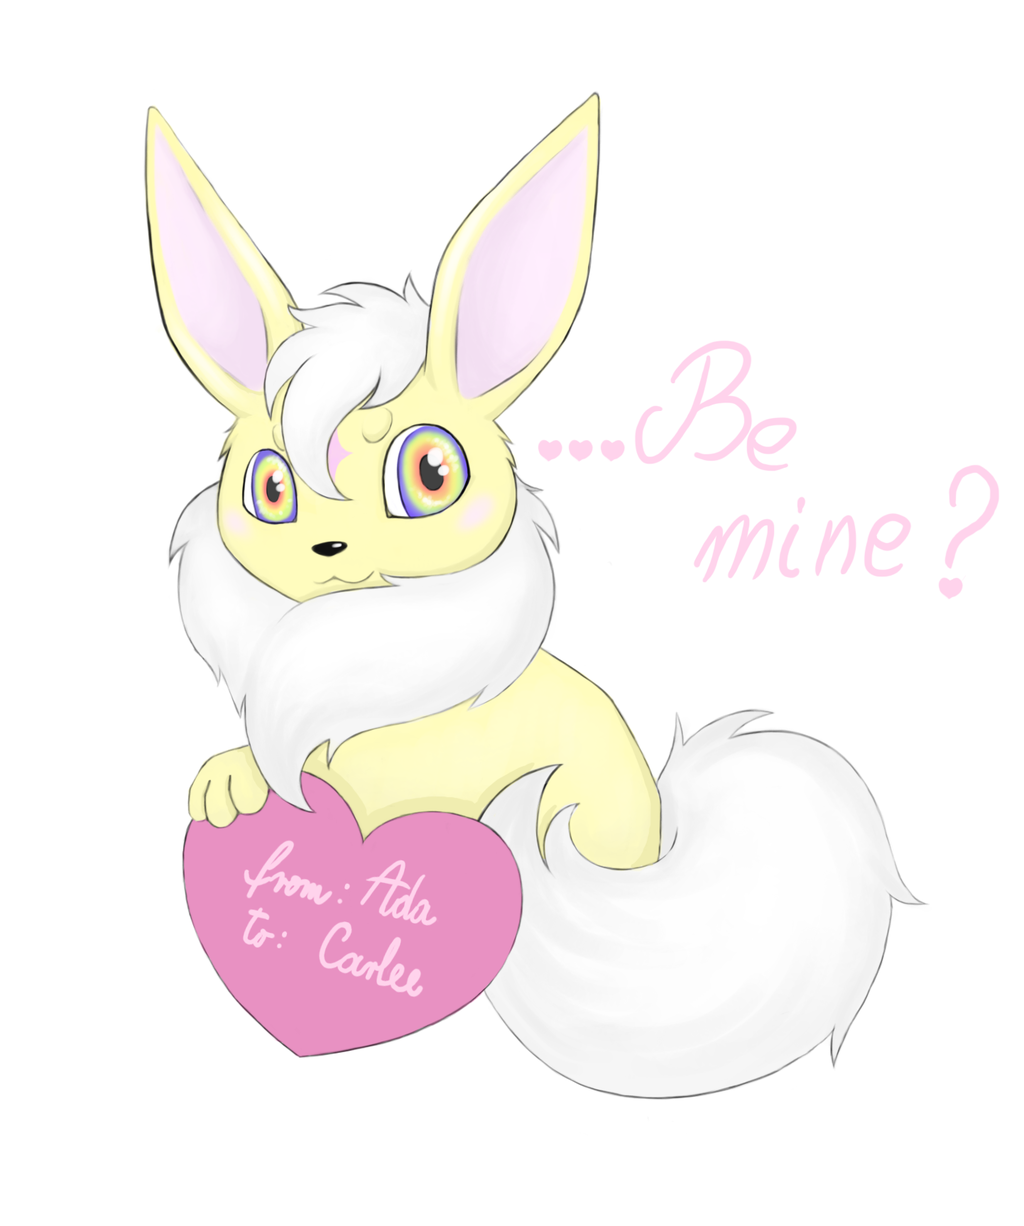 Most recent image: Be mine?